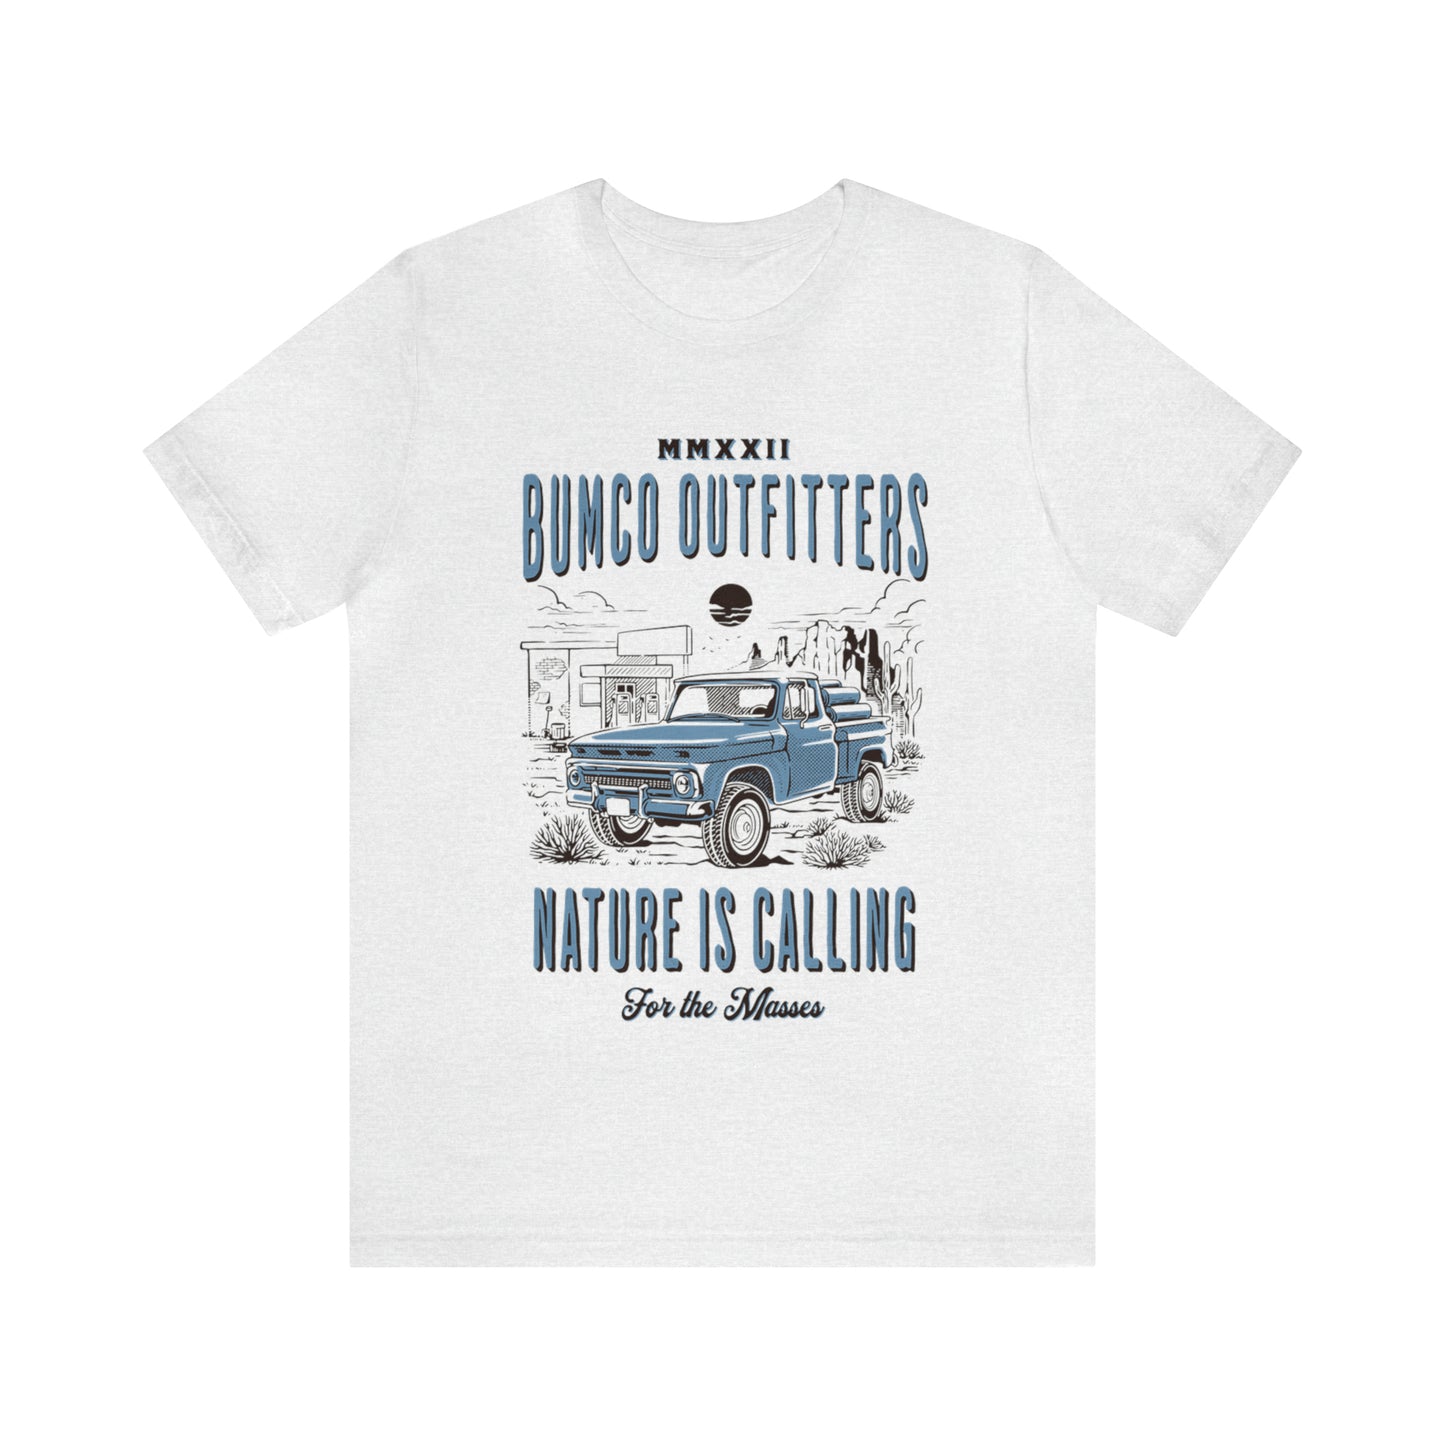 Nature is Calling - T-Shirt